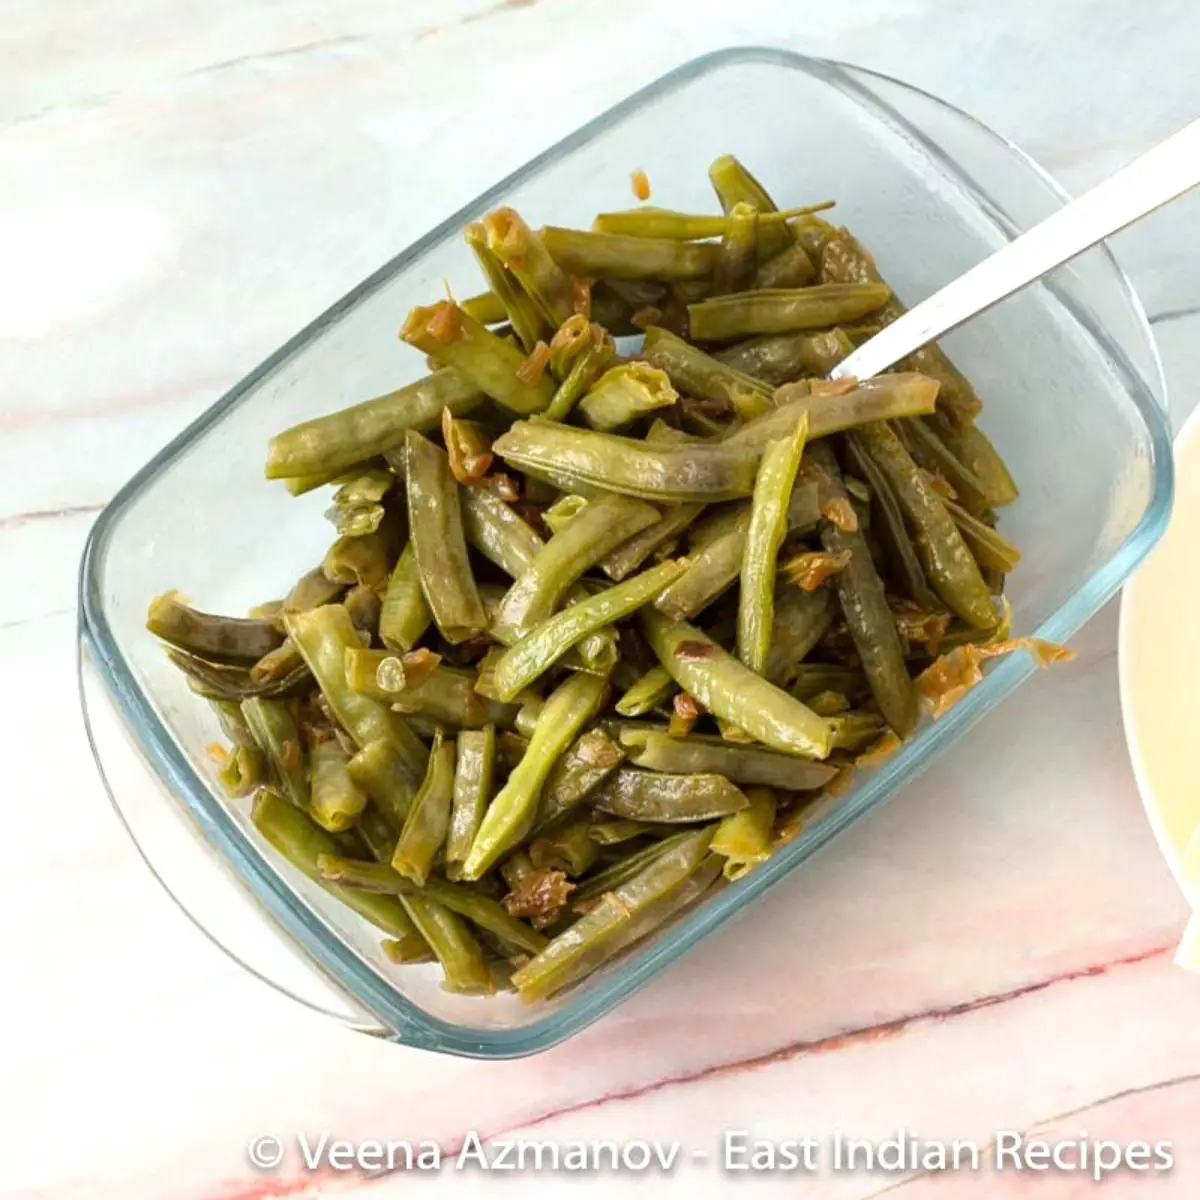 Sauteed beans in a bowl.